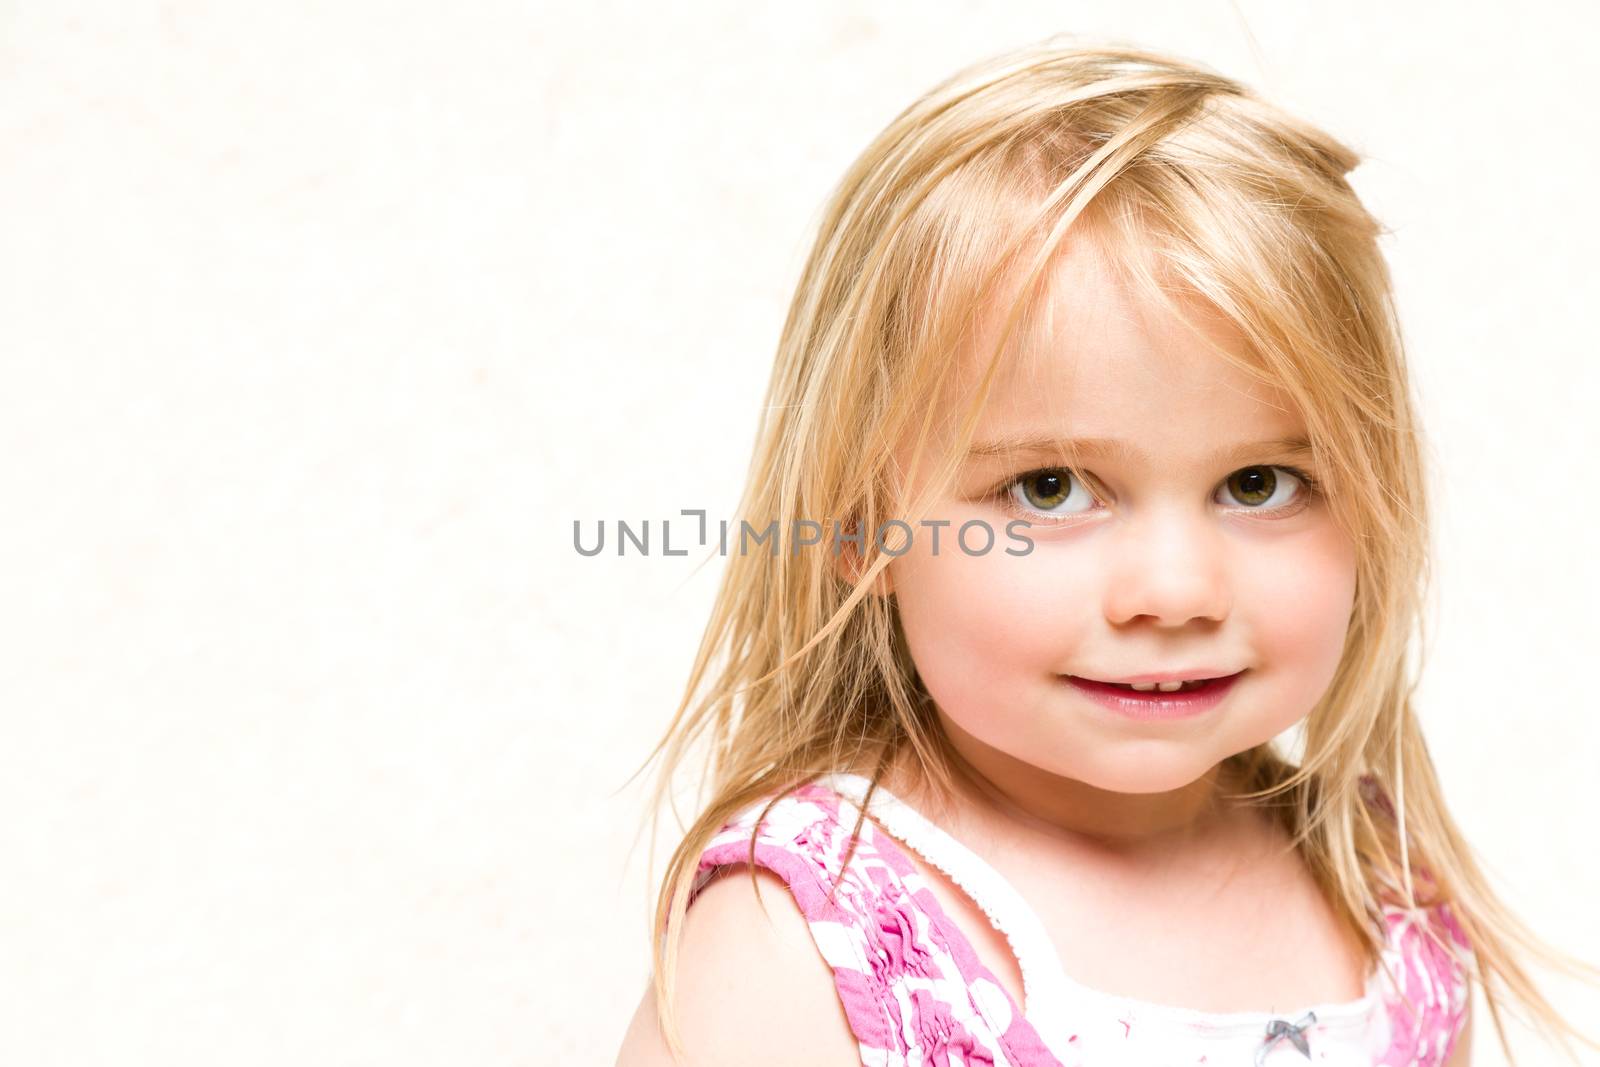 Portrait of Beautiful Smiling Toddler Girl with Blonde Hair by scheriton